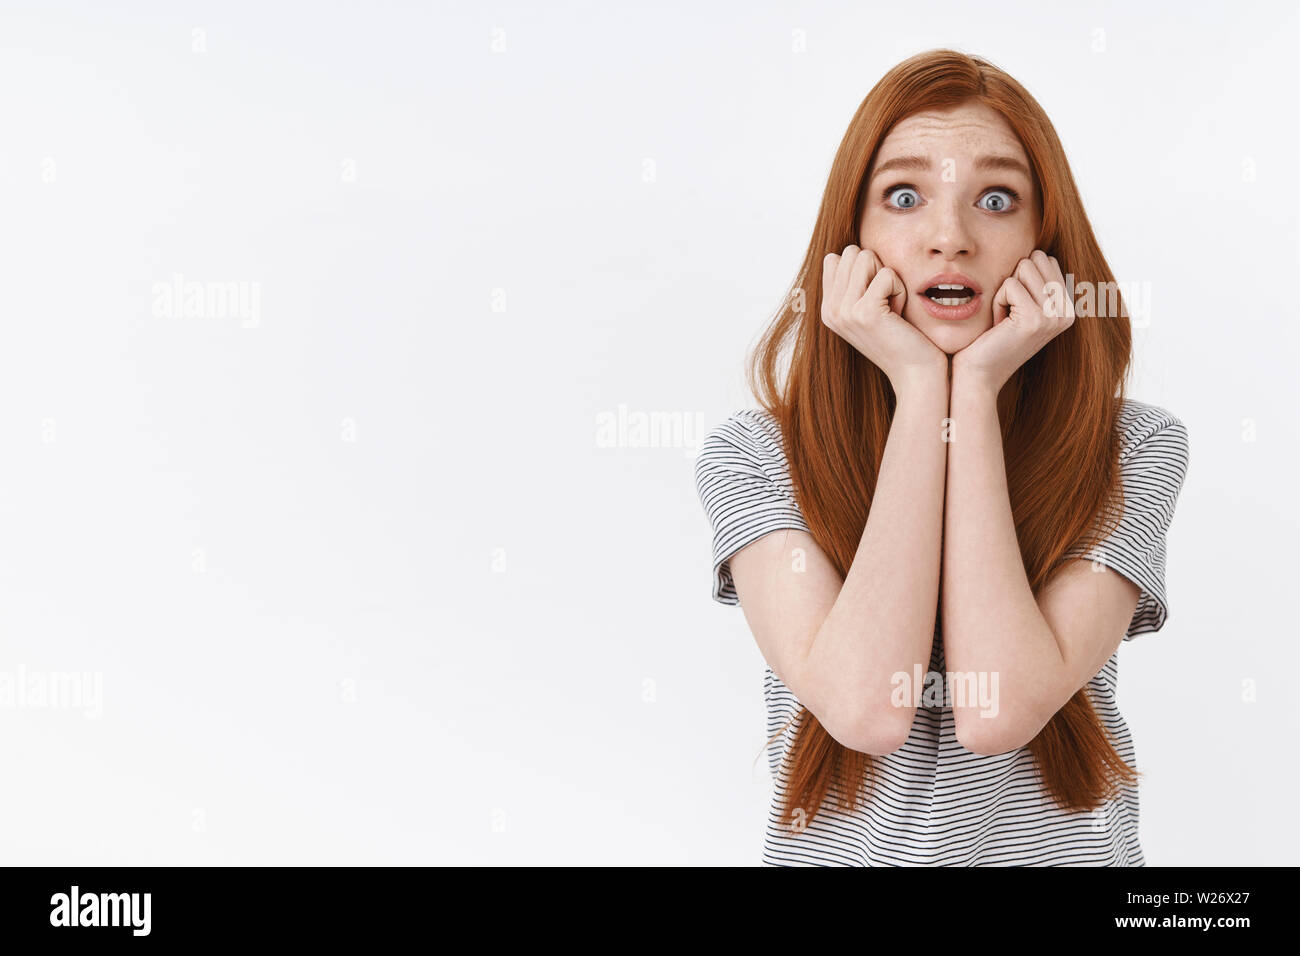 Shocked panicking freaked out young worried redhead girl popping eyes scared look concerned hold hands jawline trembling screaming horrified, watching Stock Photo